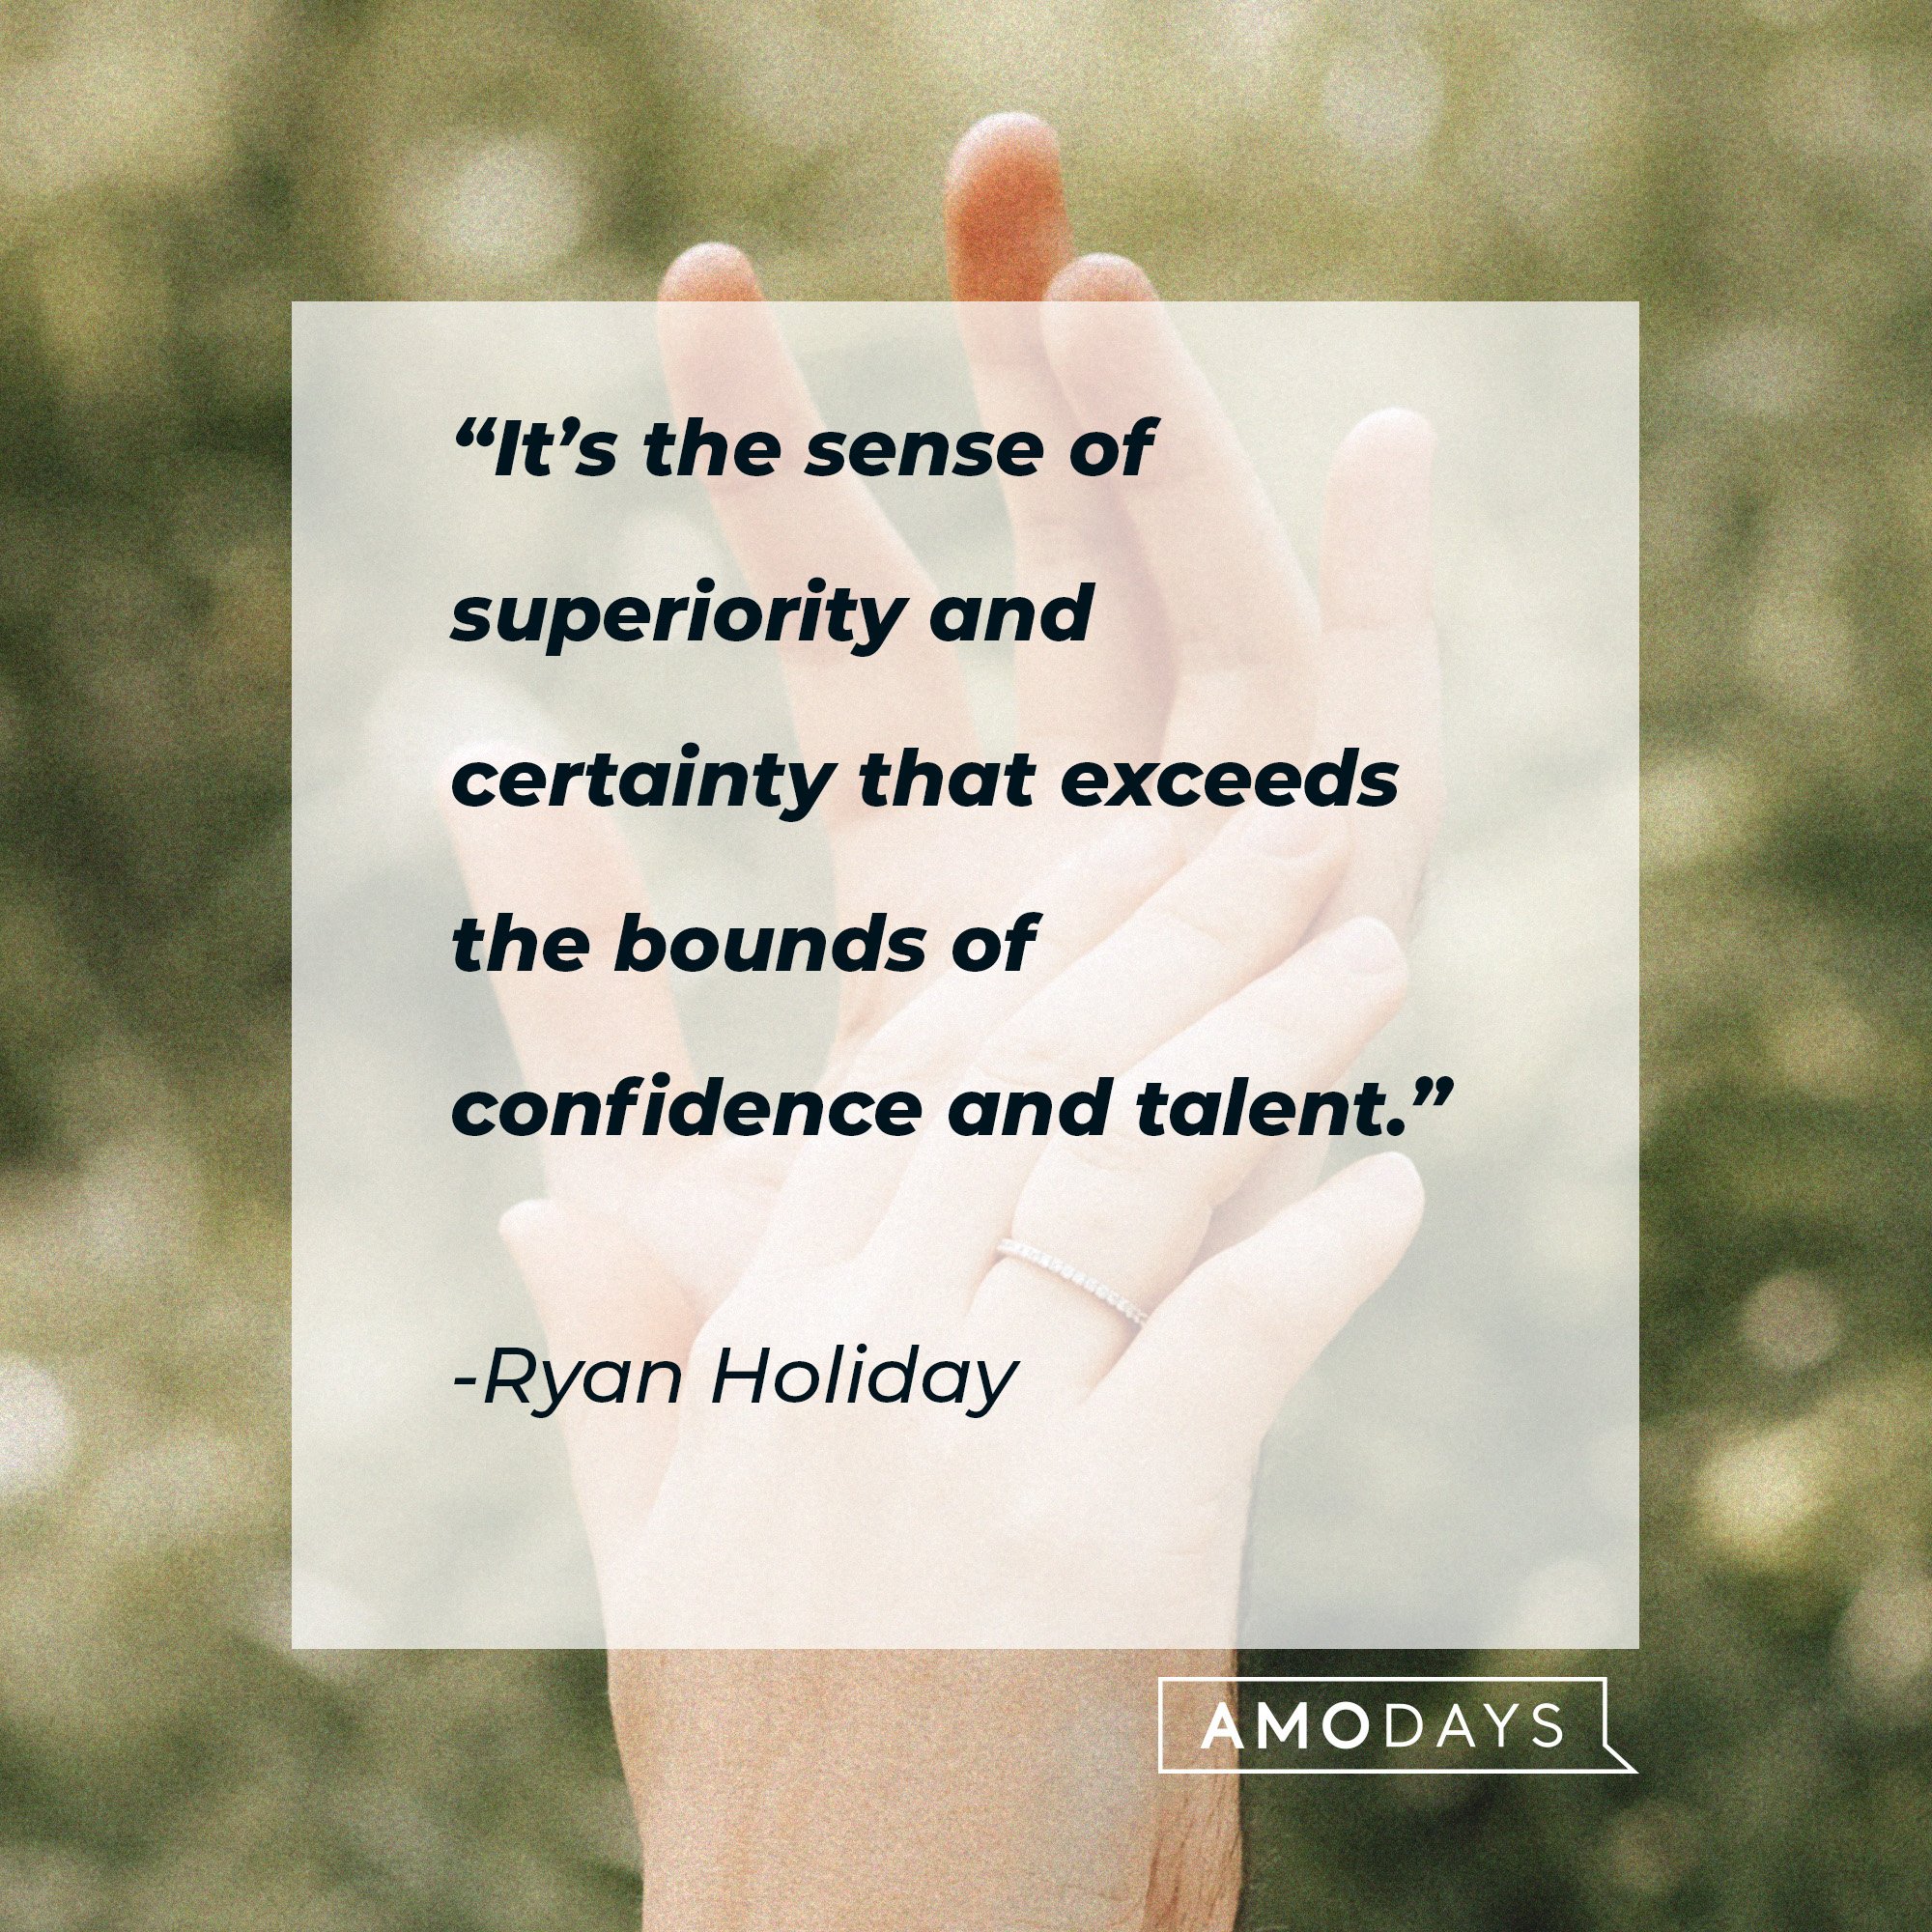 Ryan Holiday's quote: “It’s the sense of superiority and certainty that exceeds the bounds of confidence and talent.” | Image: AmoDays